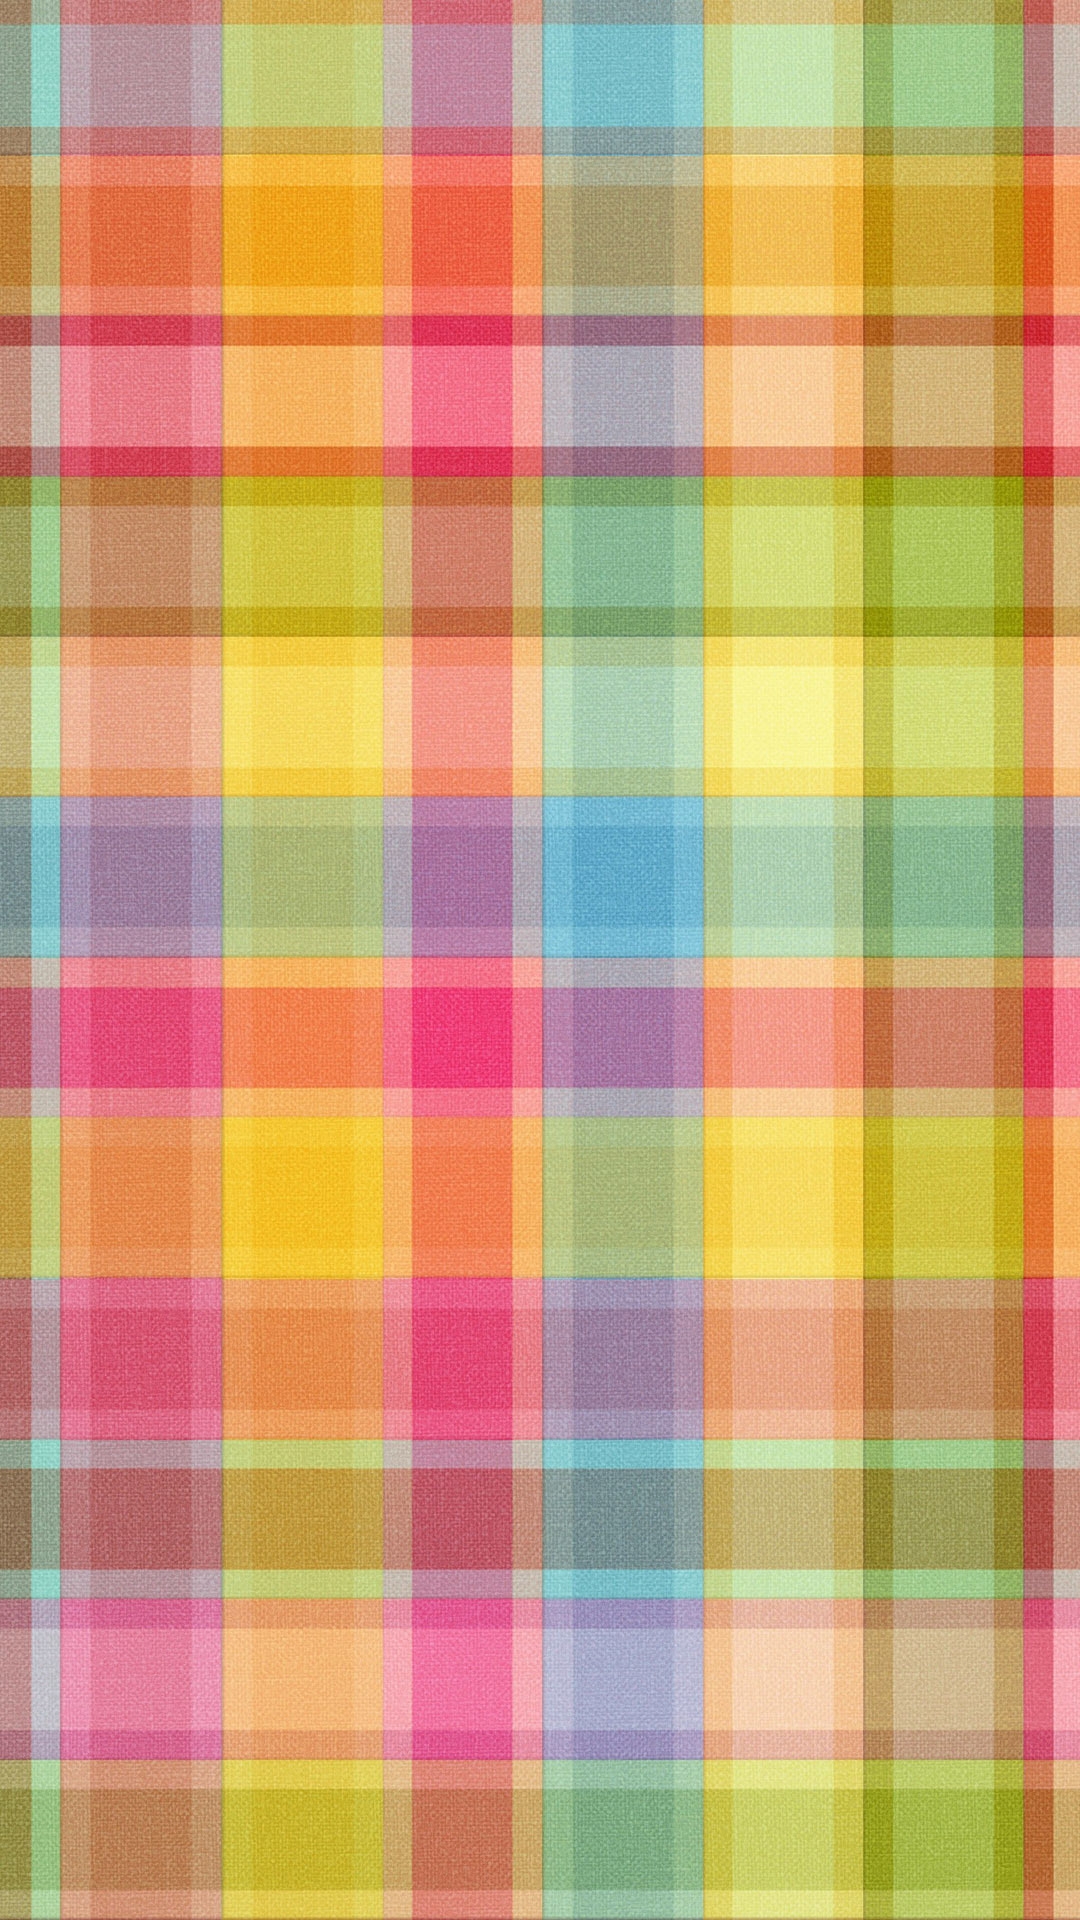 Download Colorful Pattern Wallpaper Mobile #wr8ym hdxwallpaperz.com